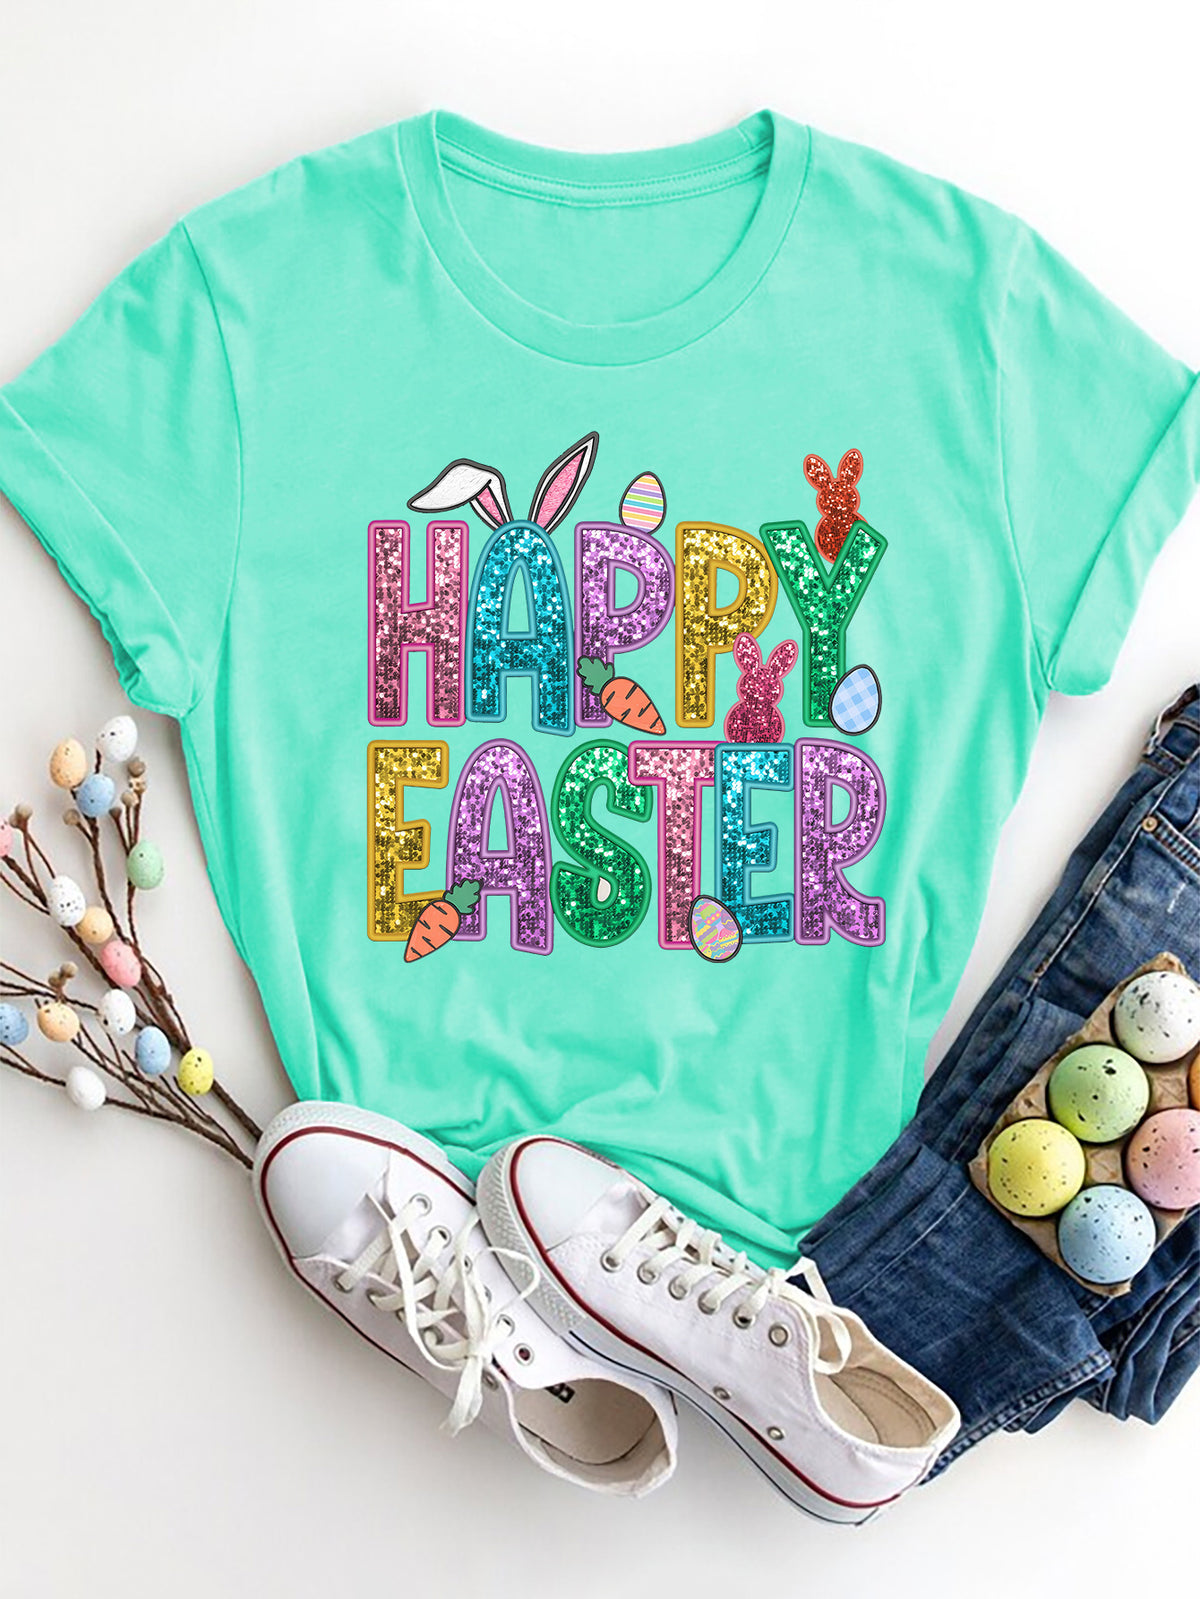 HAPPY EASTER Round Neck Short Sleeve T-Shirt